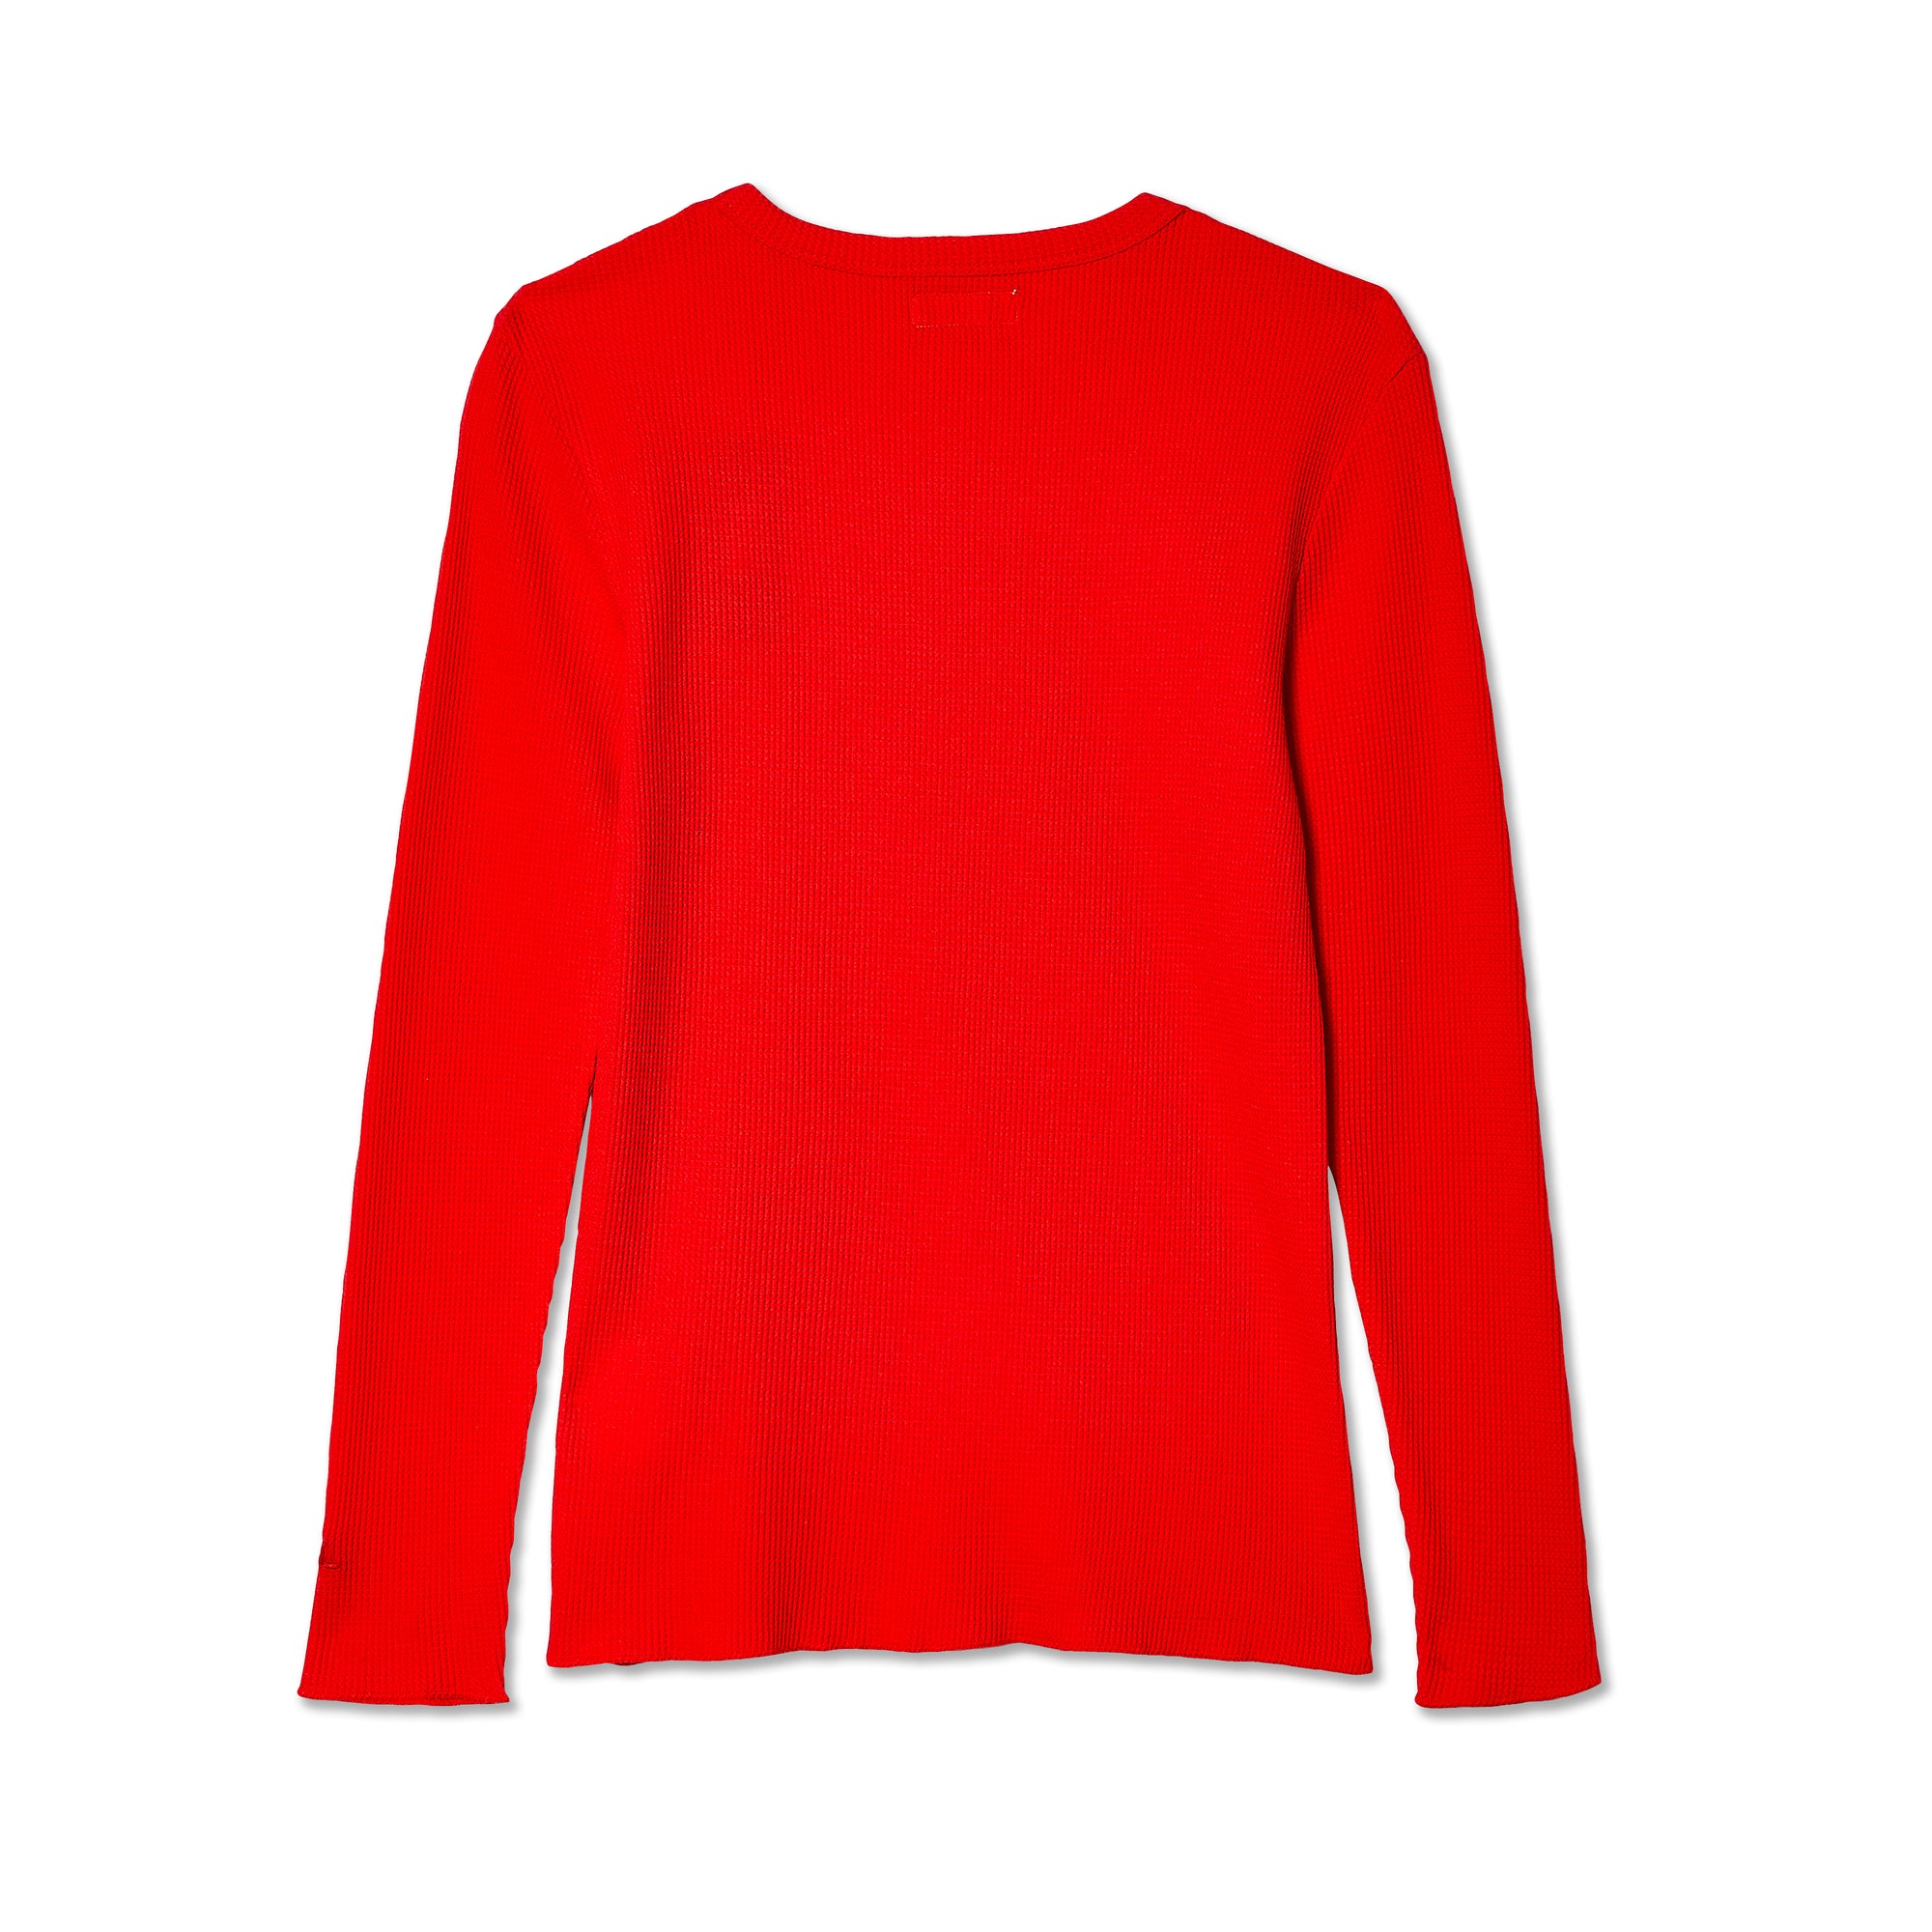 ERL - Men's Waffle Long Sleeve T-Shirt - (Red) view 2